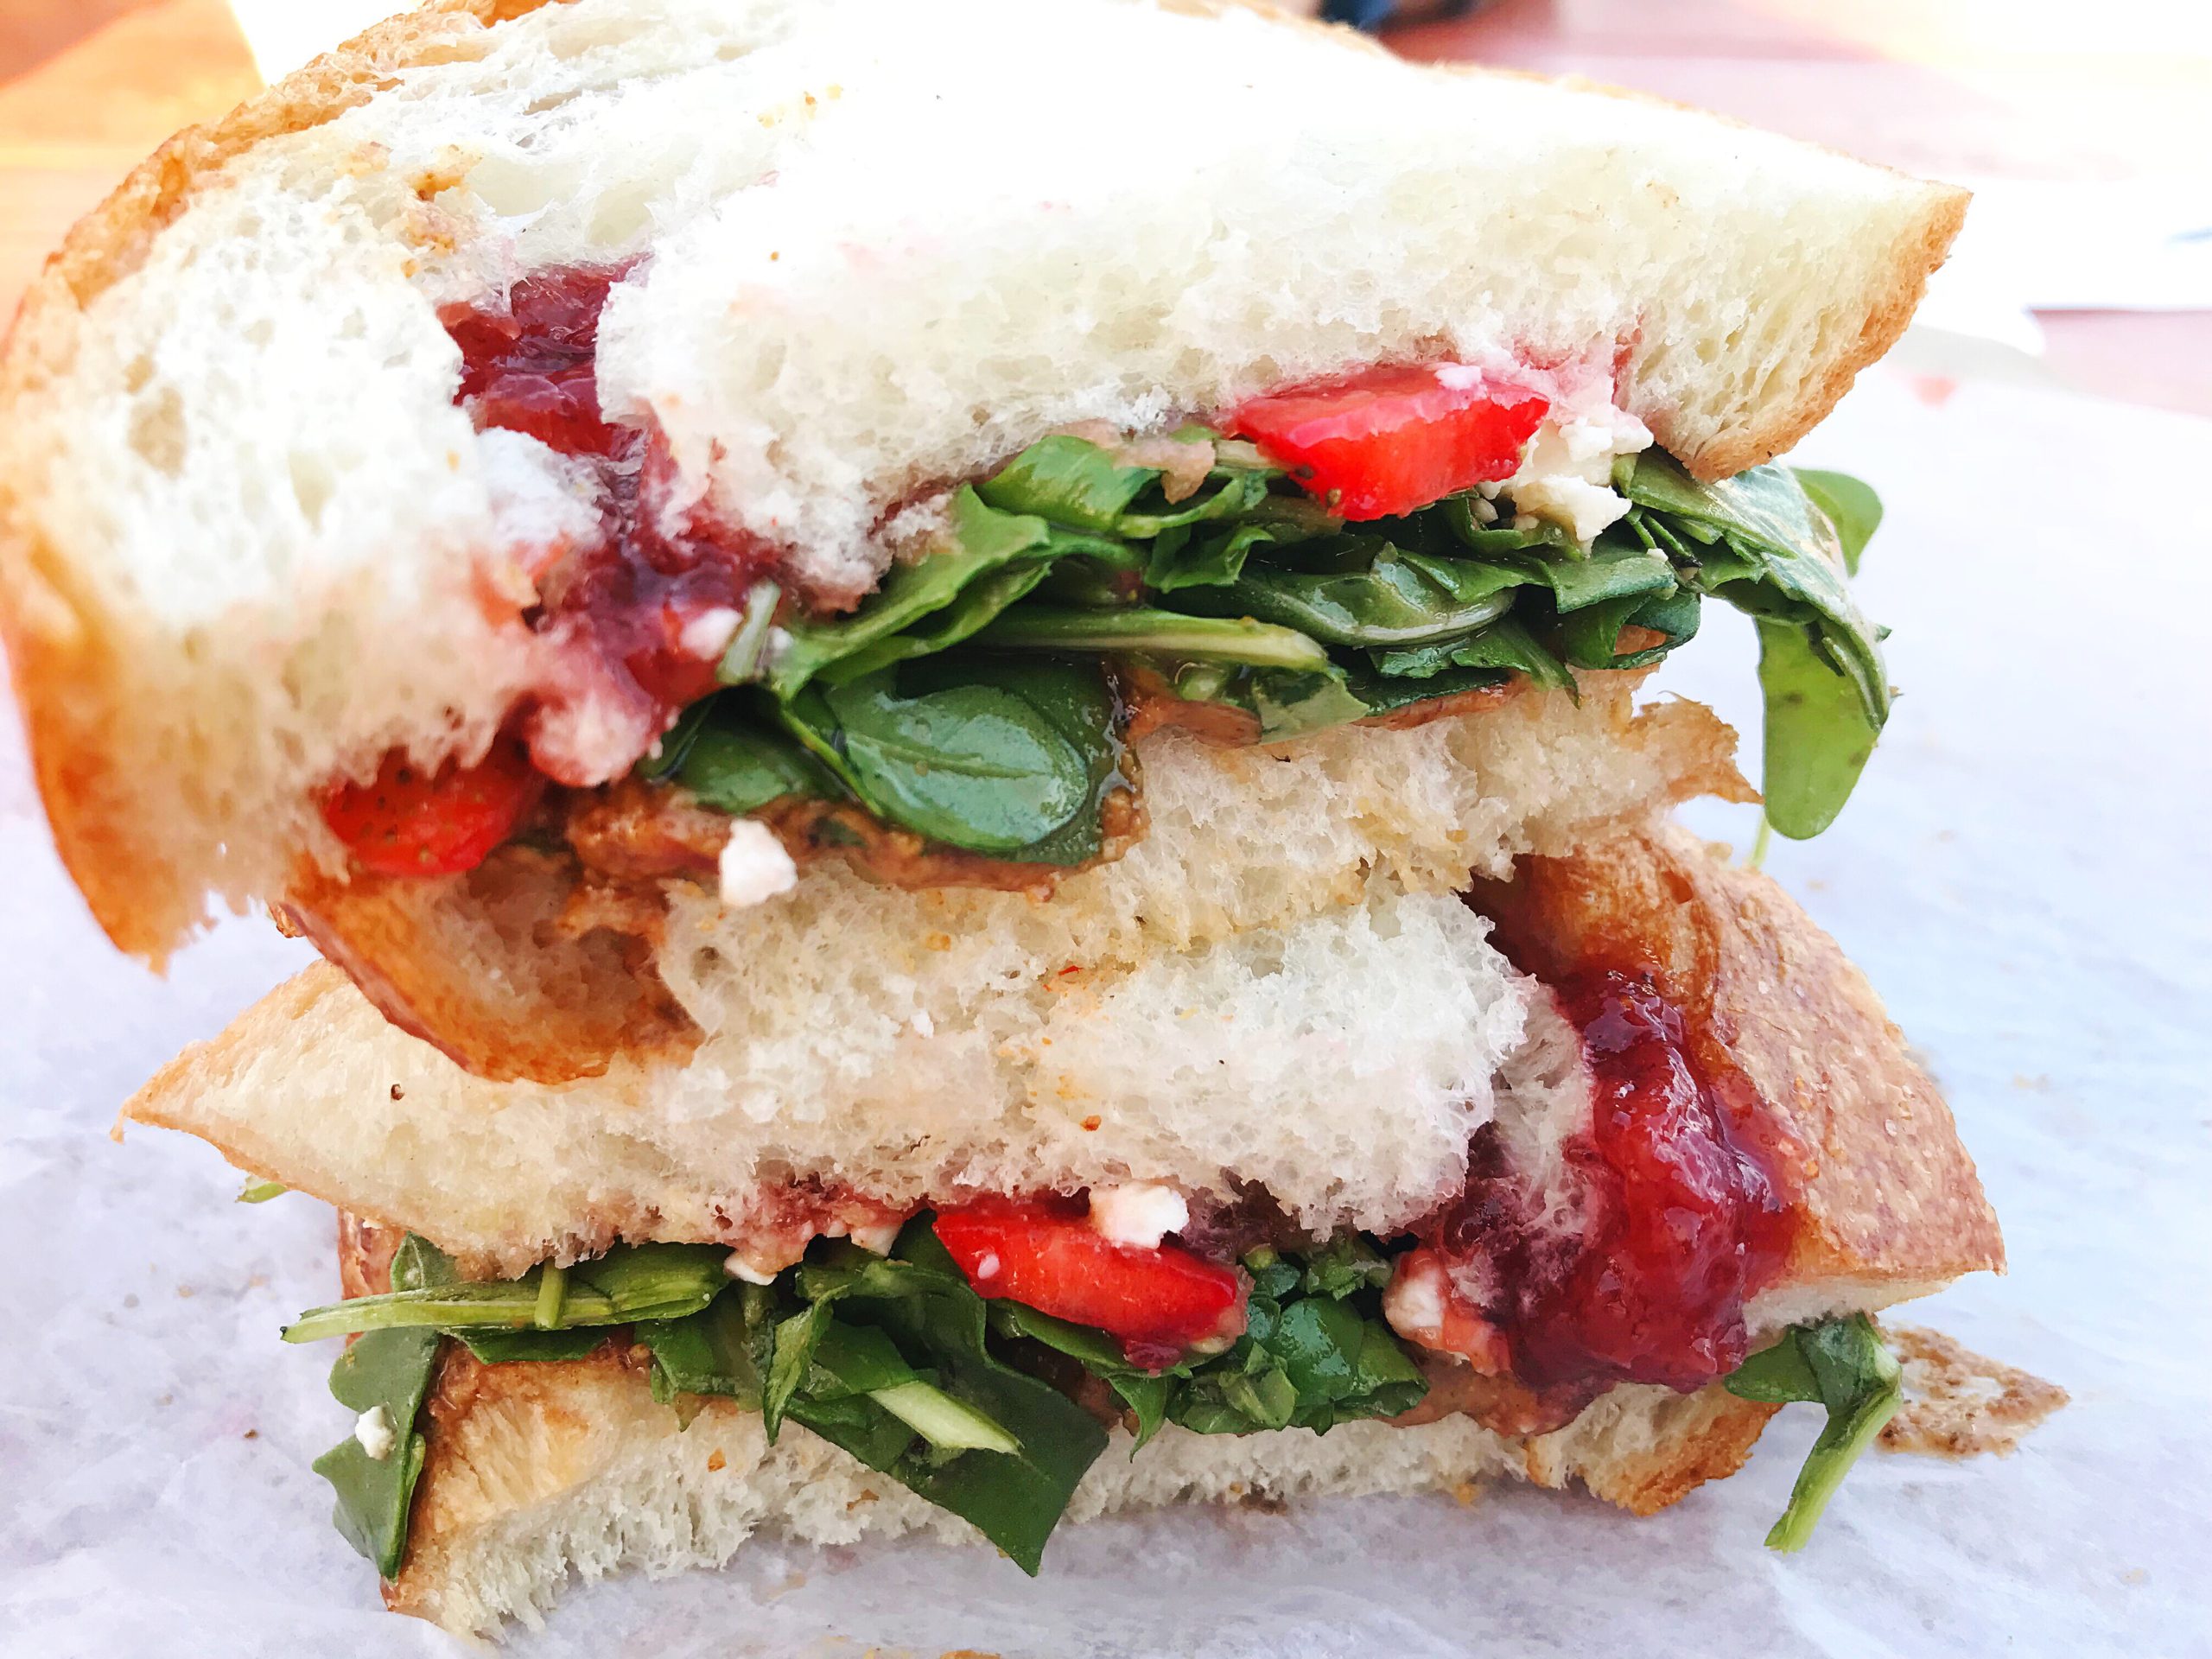 It's More Than Just a Sandwich at the PB and Jelly Deli